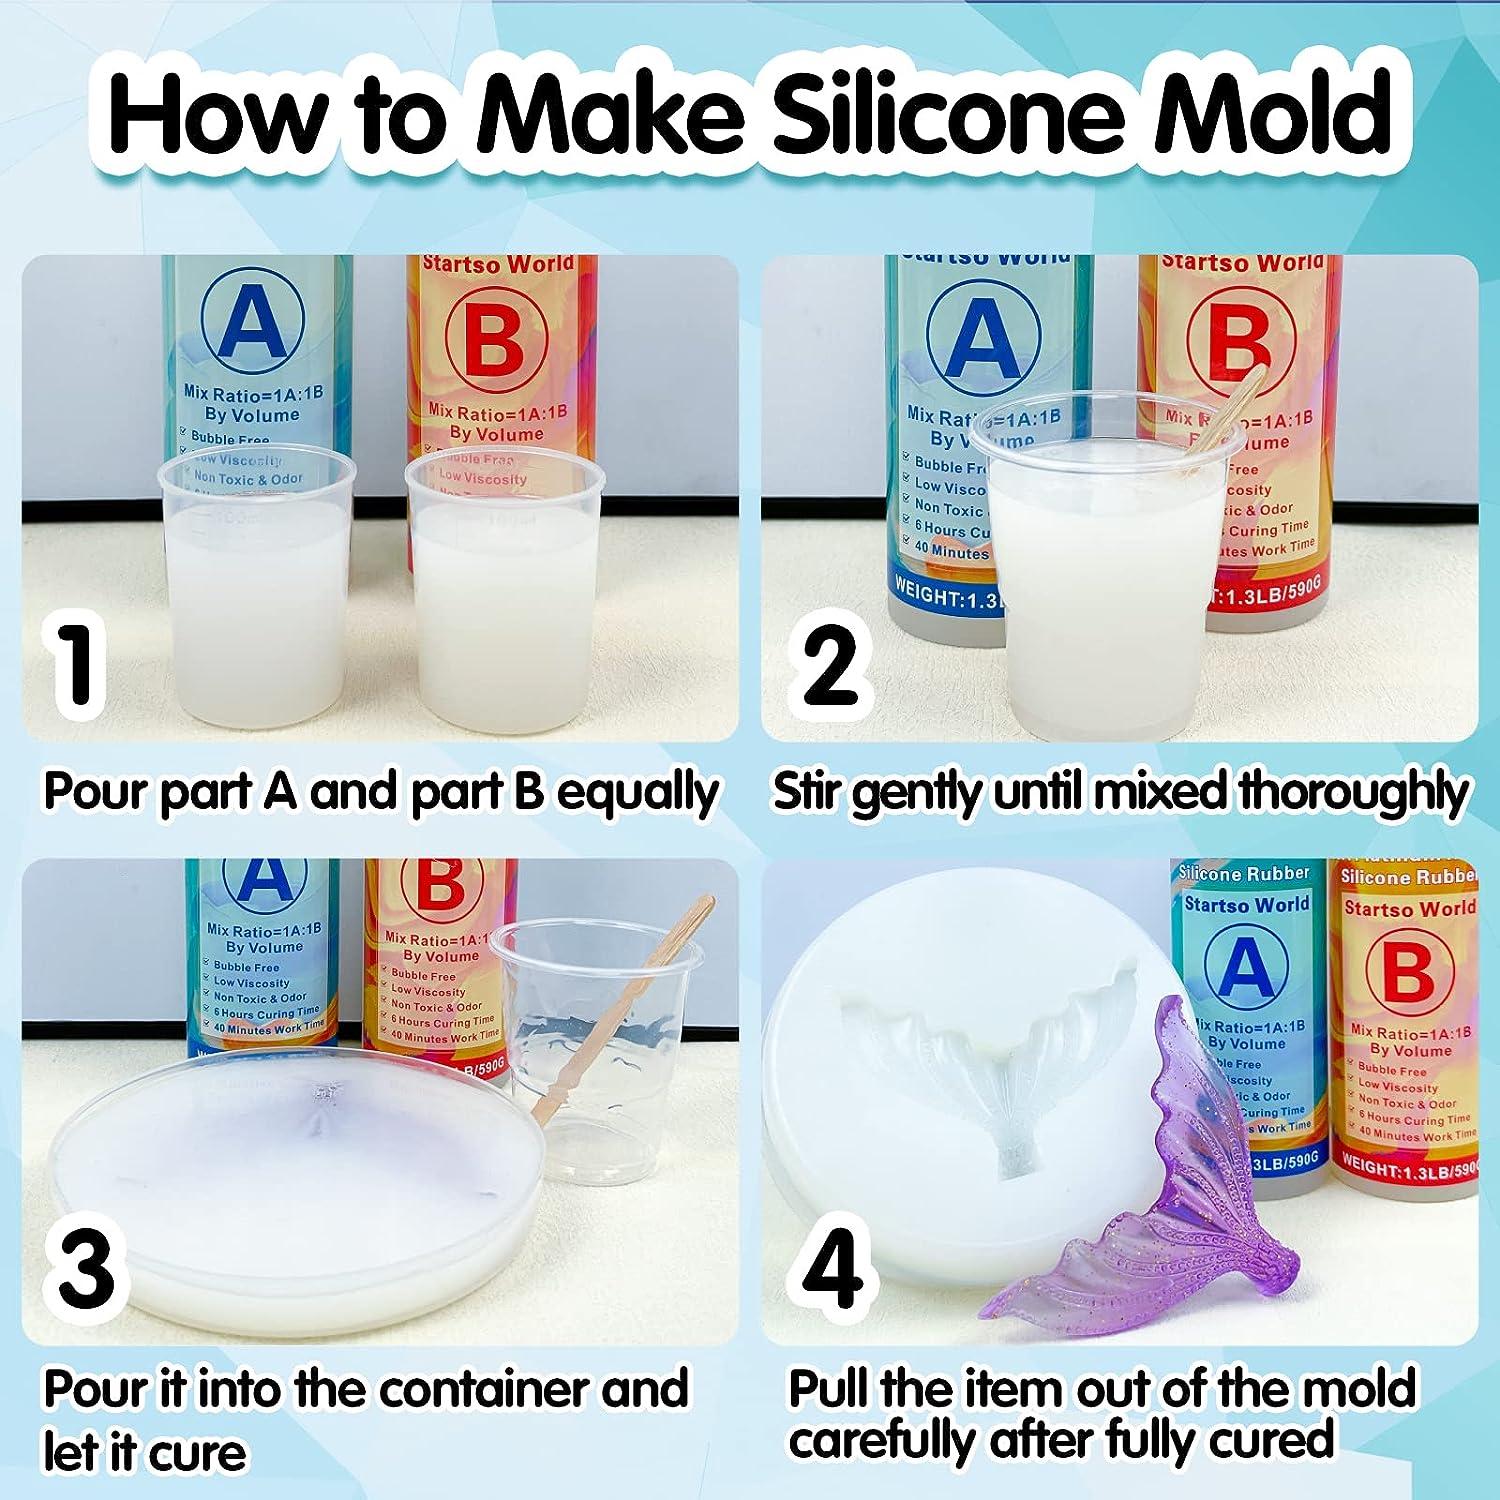  Silicone Mold Making Kit - Translucent Silicone Rubber  Non-Toxic Liquid Mold Making Silicone - Mixing Ratio 1:1 - Ideal for Resin  Molds, Silicone Molds)